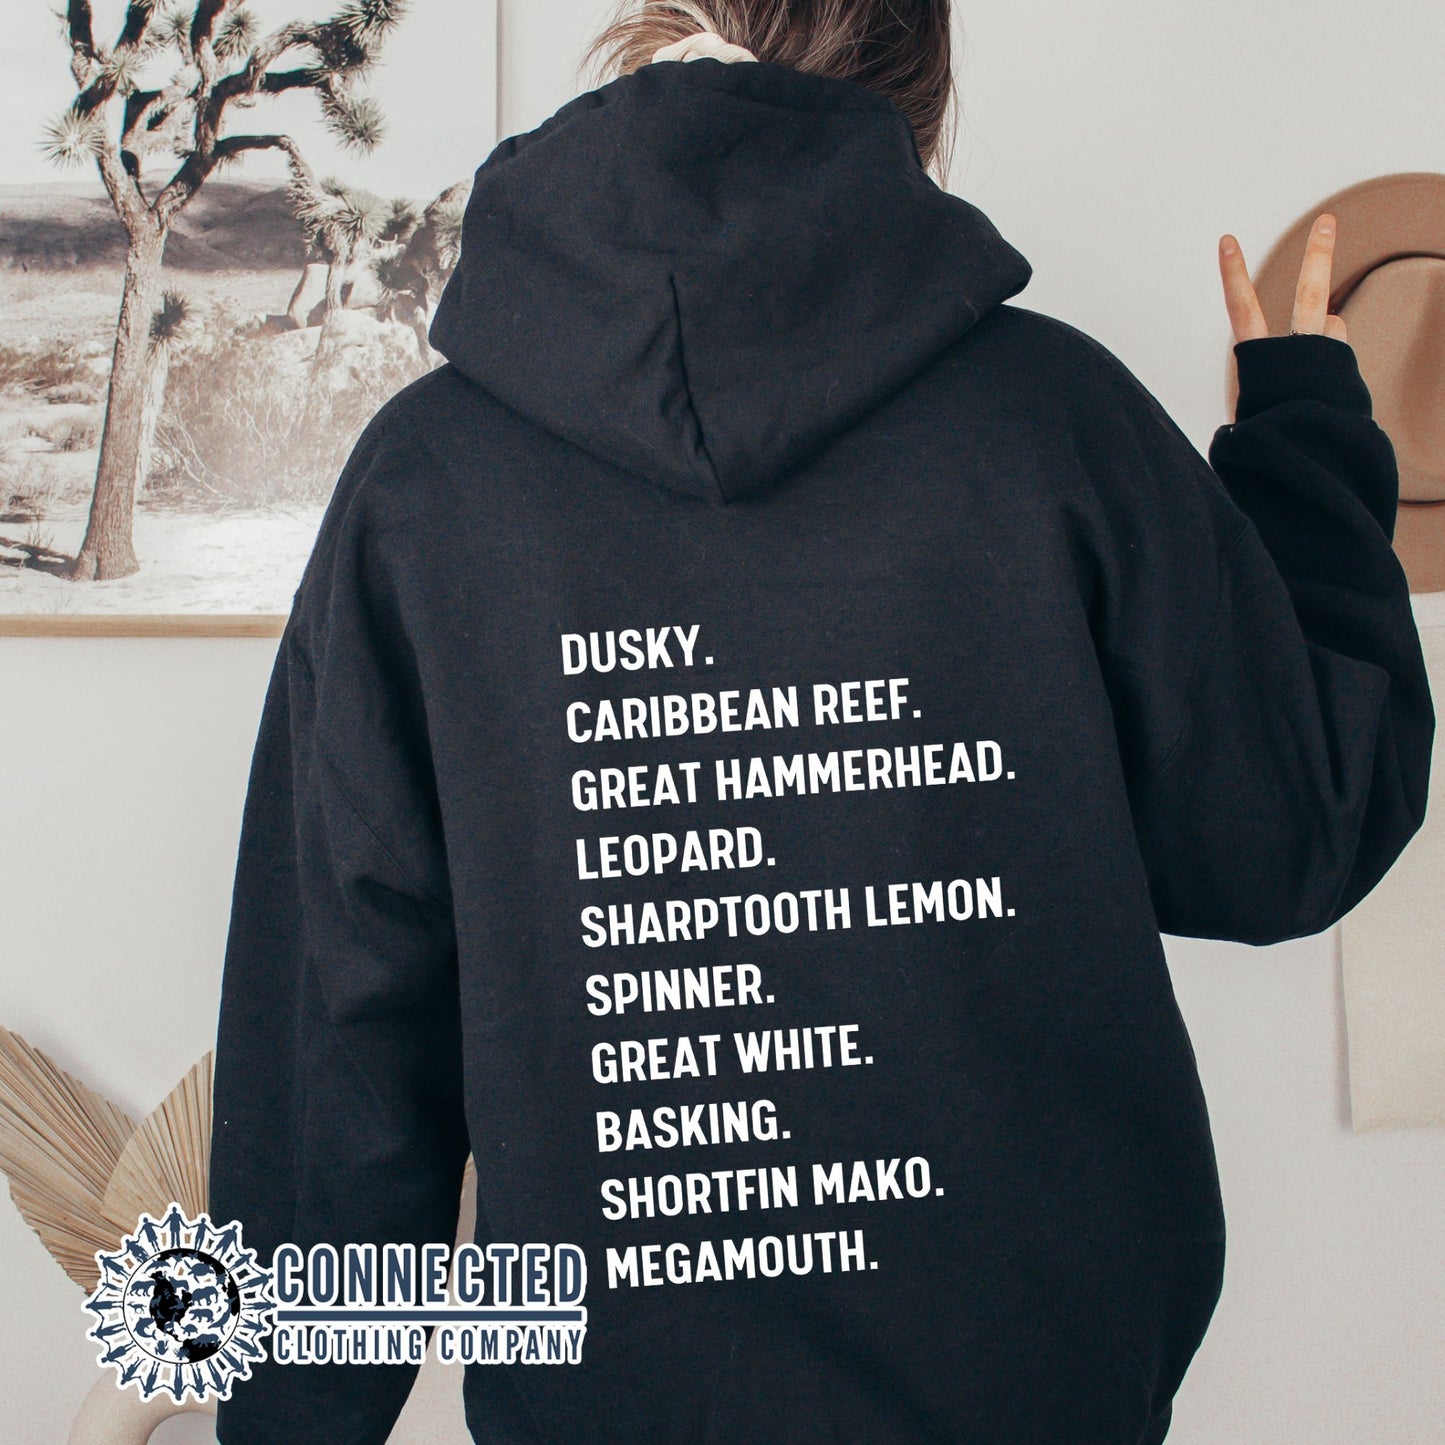 Save The Sharks Species Hoodie - Connected Clothing Company - 10% donated to shark conservation